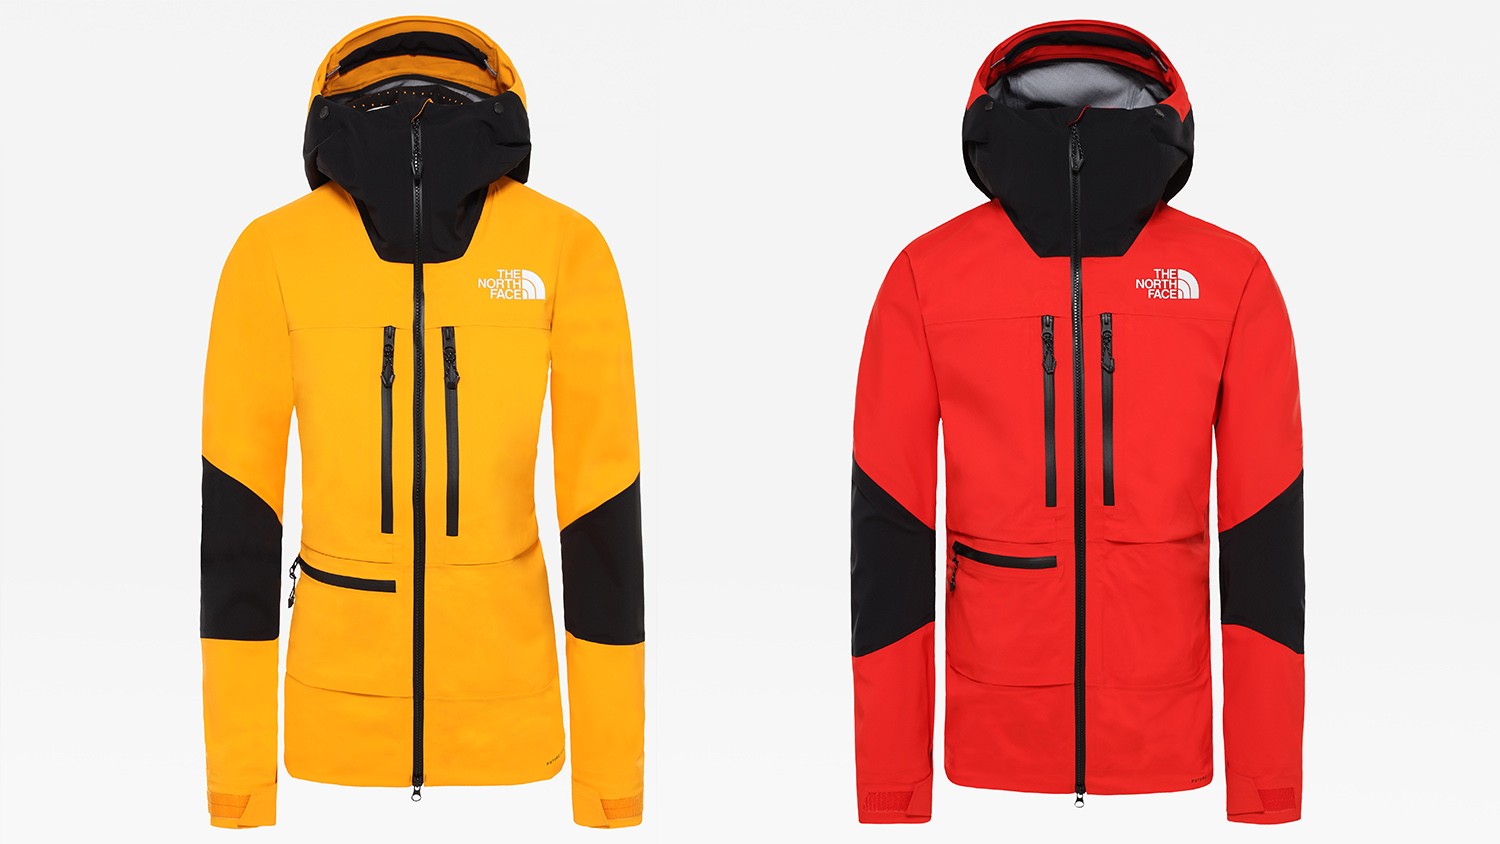 The North Face comes with a collection of its FUTURELIGHT fabric